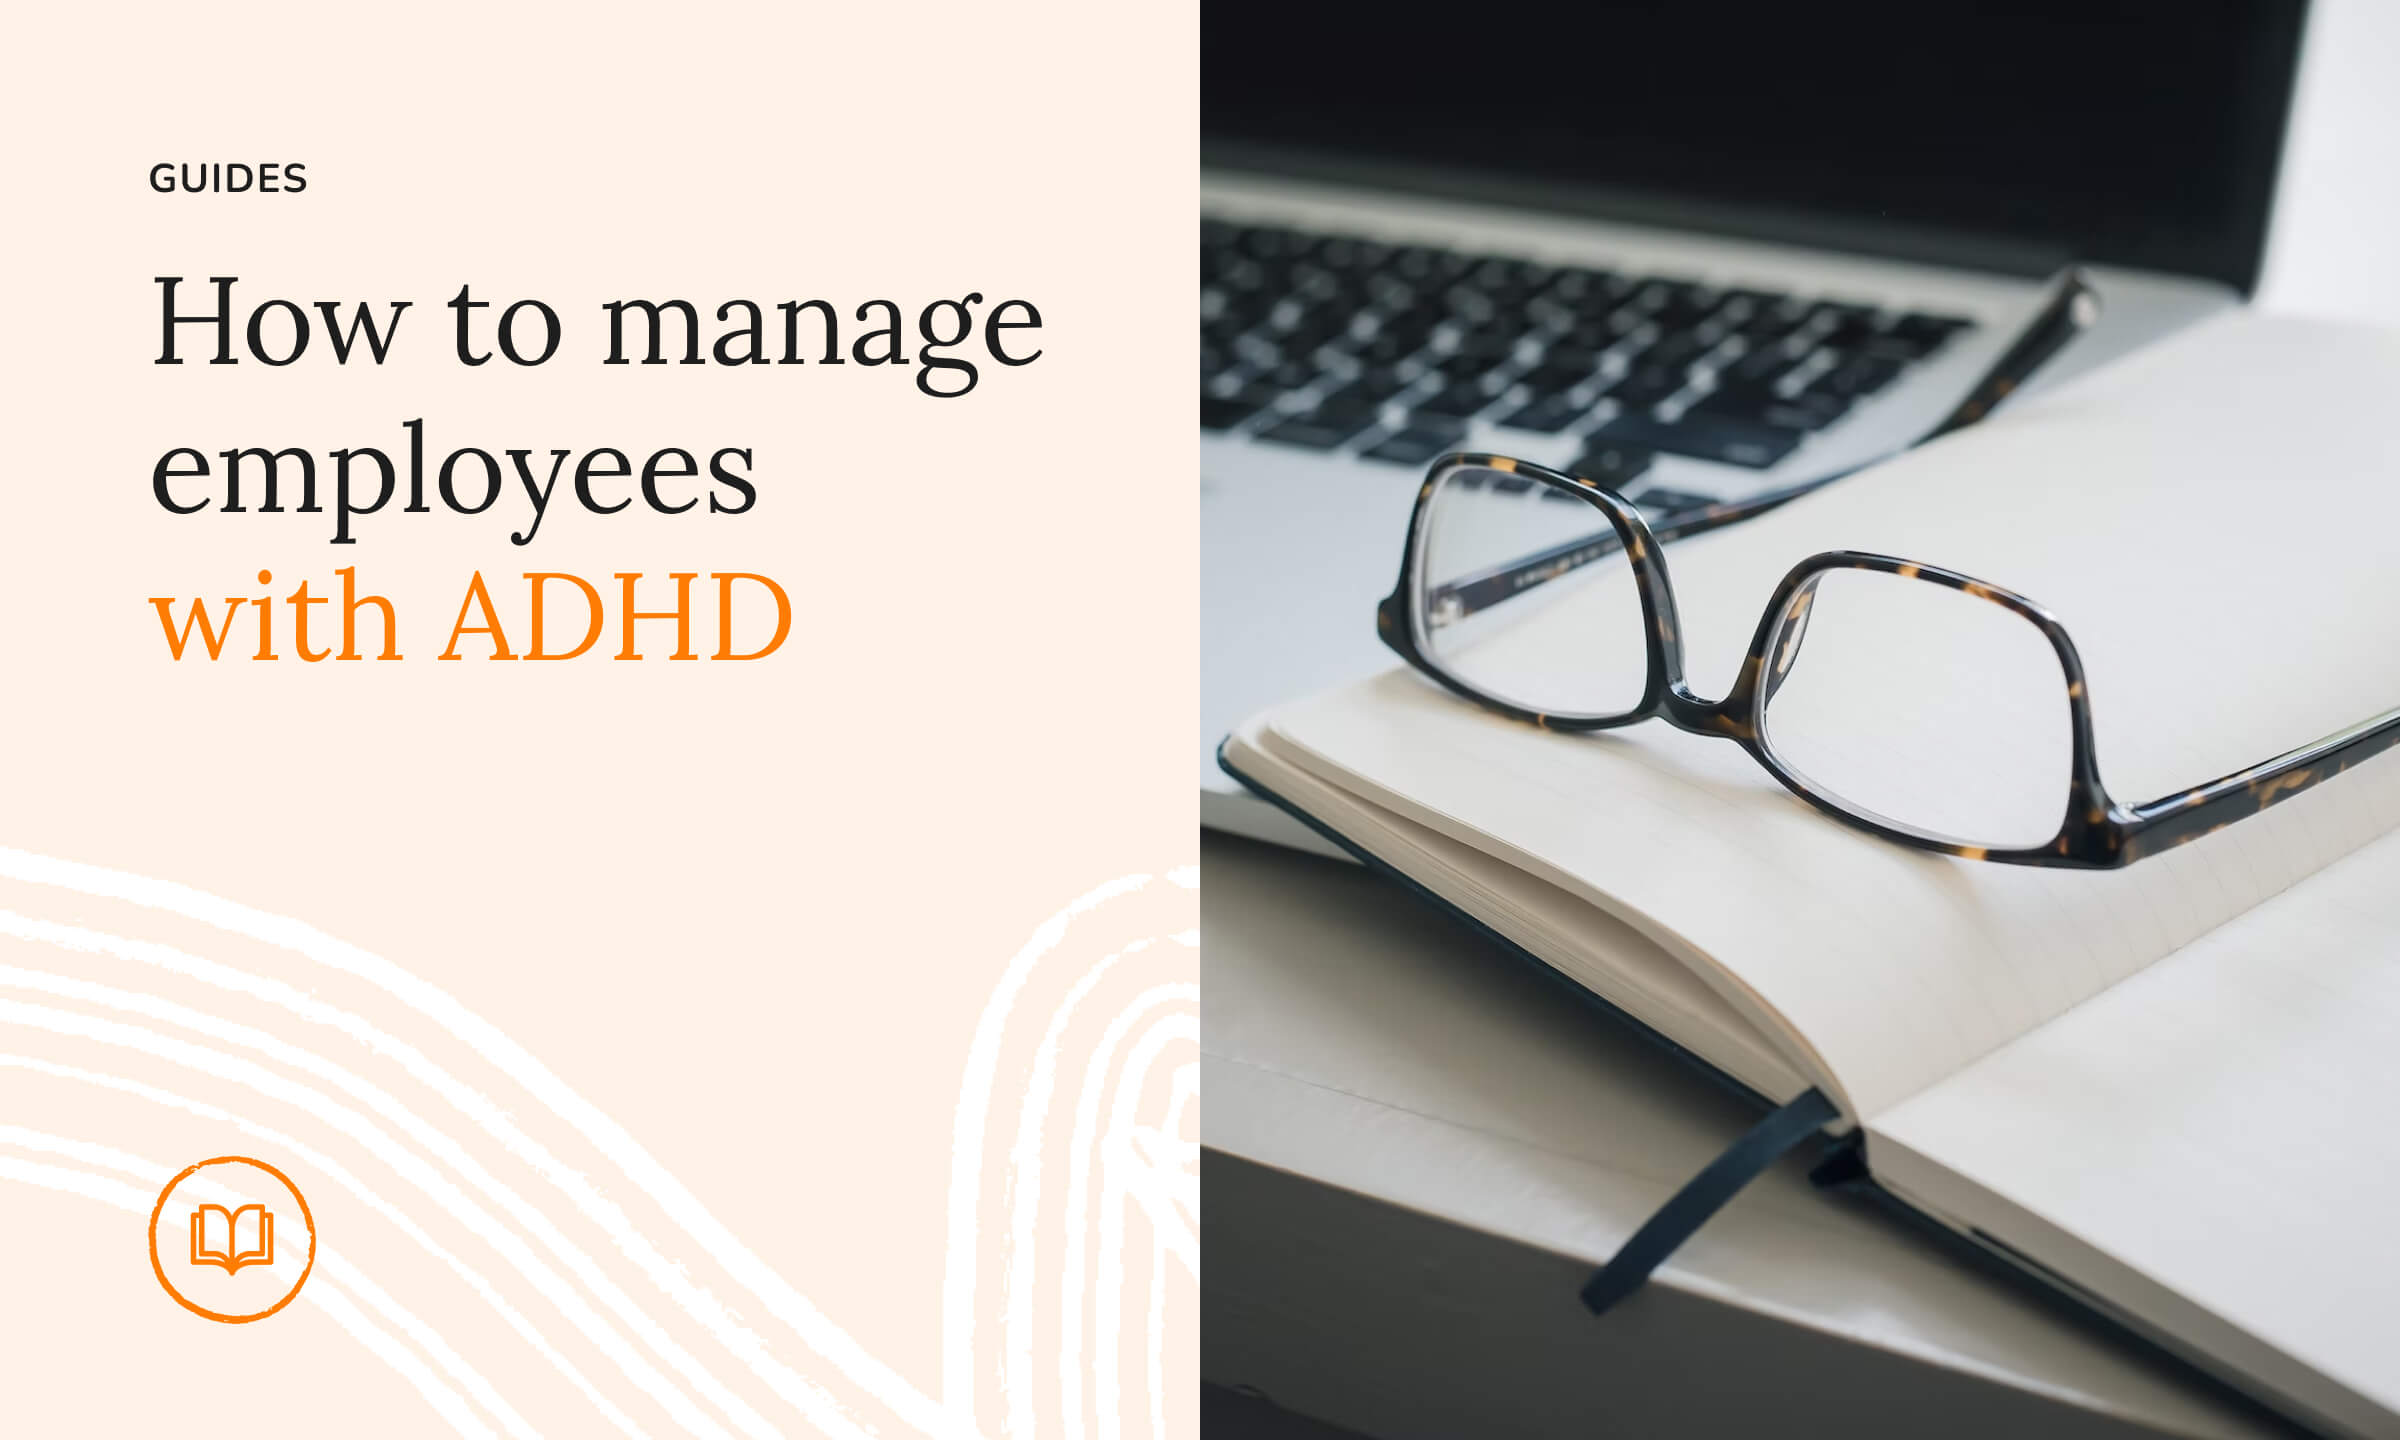 Employees with ADHD: Manage them so they thrive